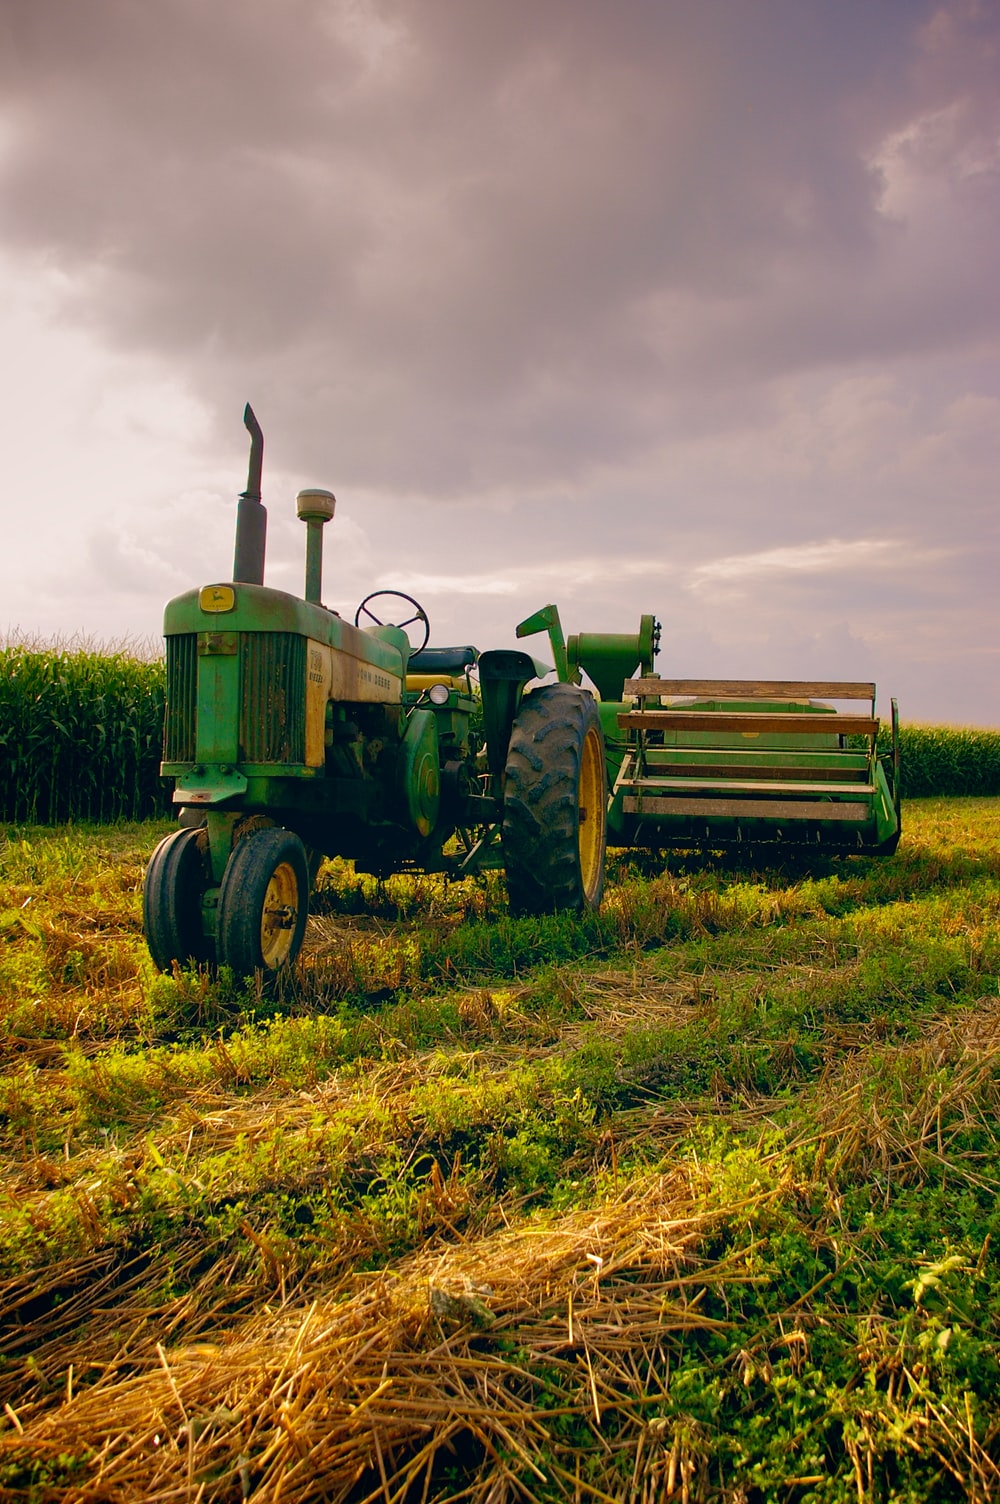 Agriculture Machinery Picture. Download Free Image